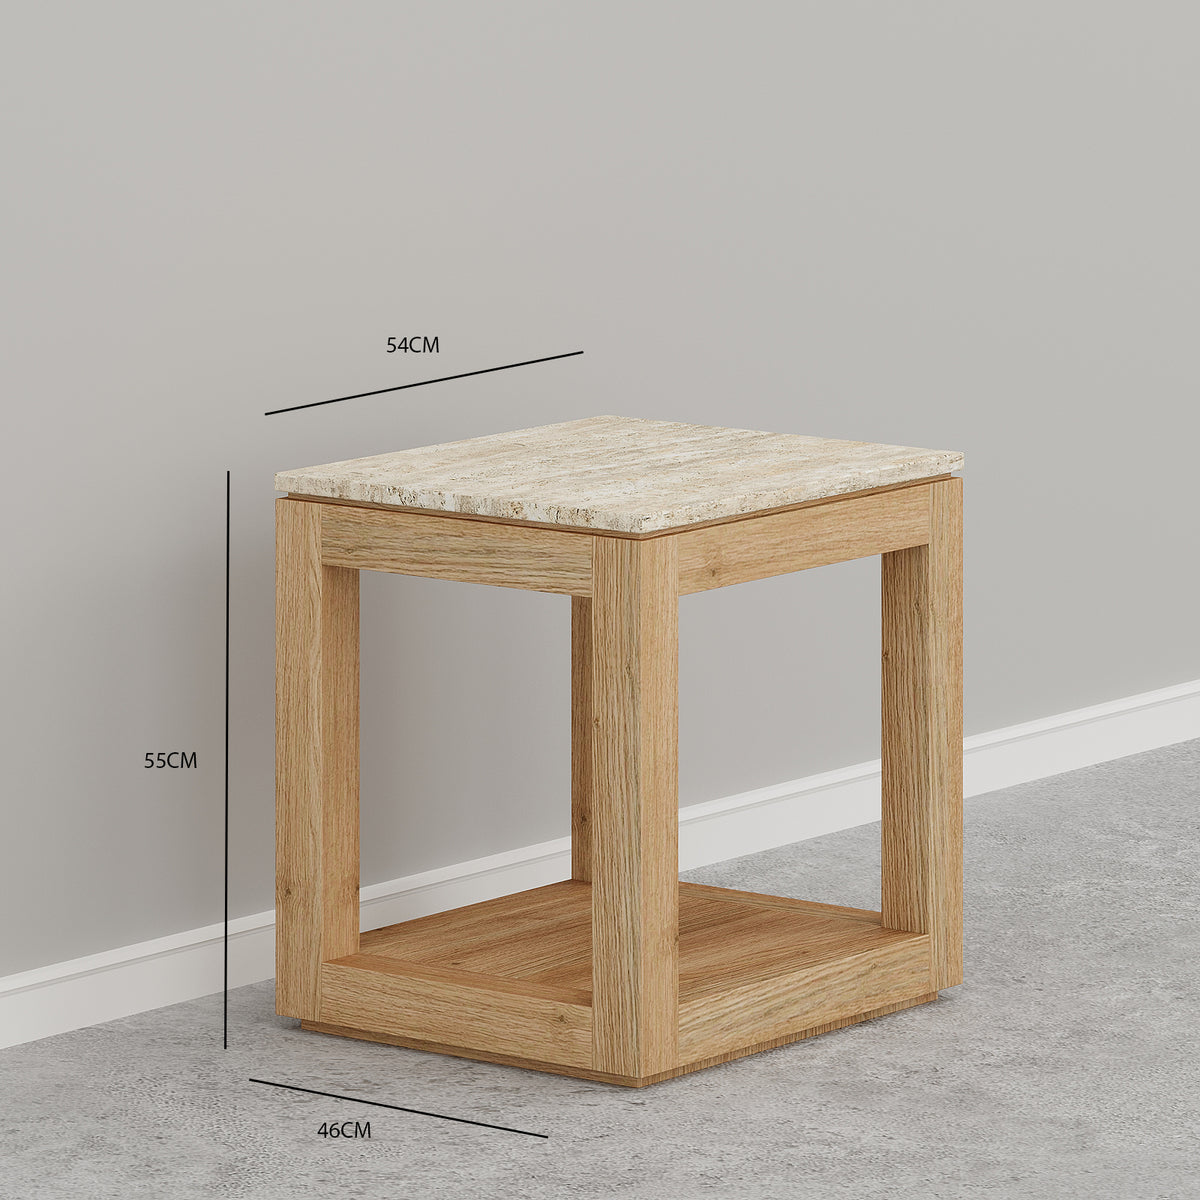 Orion Side Table / 54 x 46 CM